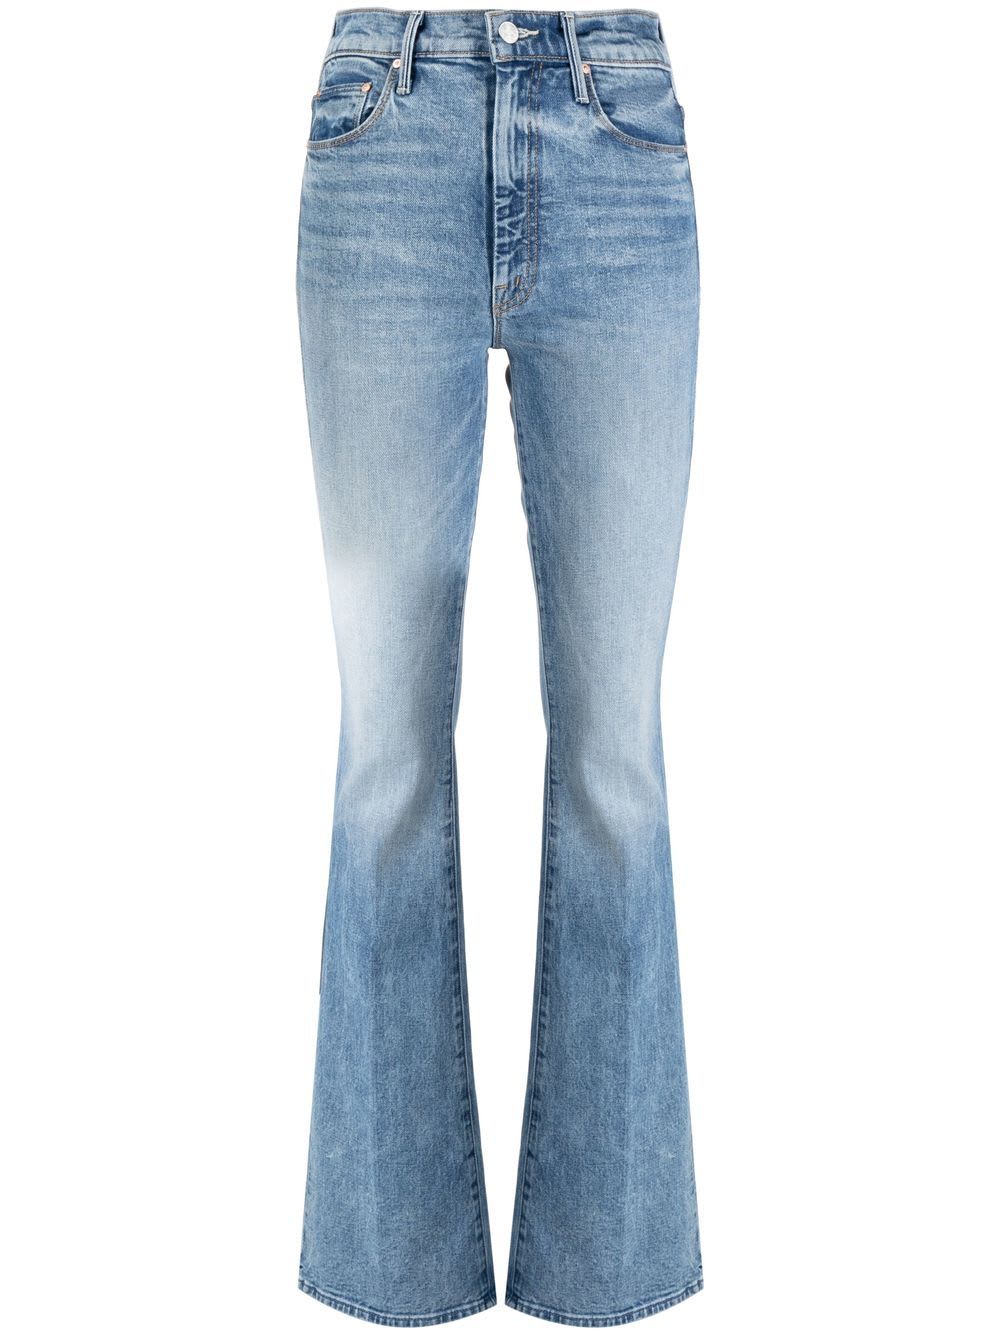 MOTHER LIGHT BLUE FIVE POCKETS FLARED JEANS IN STRETCH COTTON DENIM WOMAN